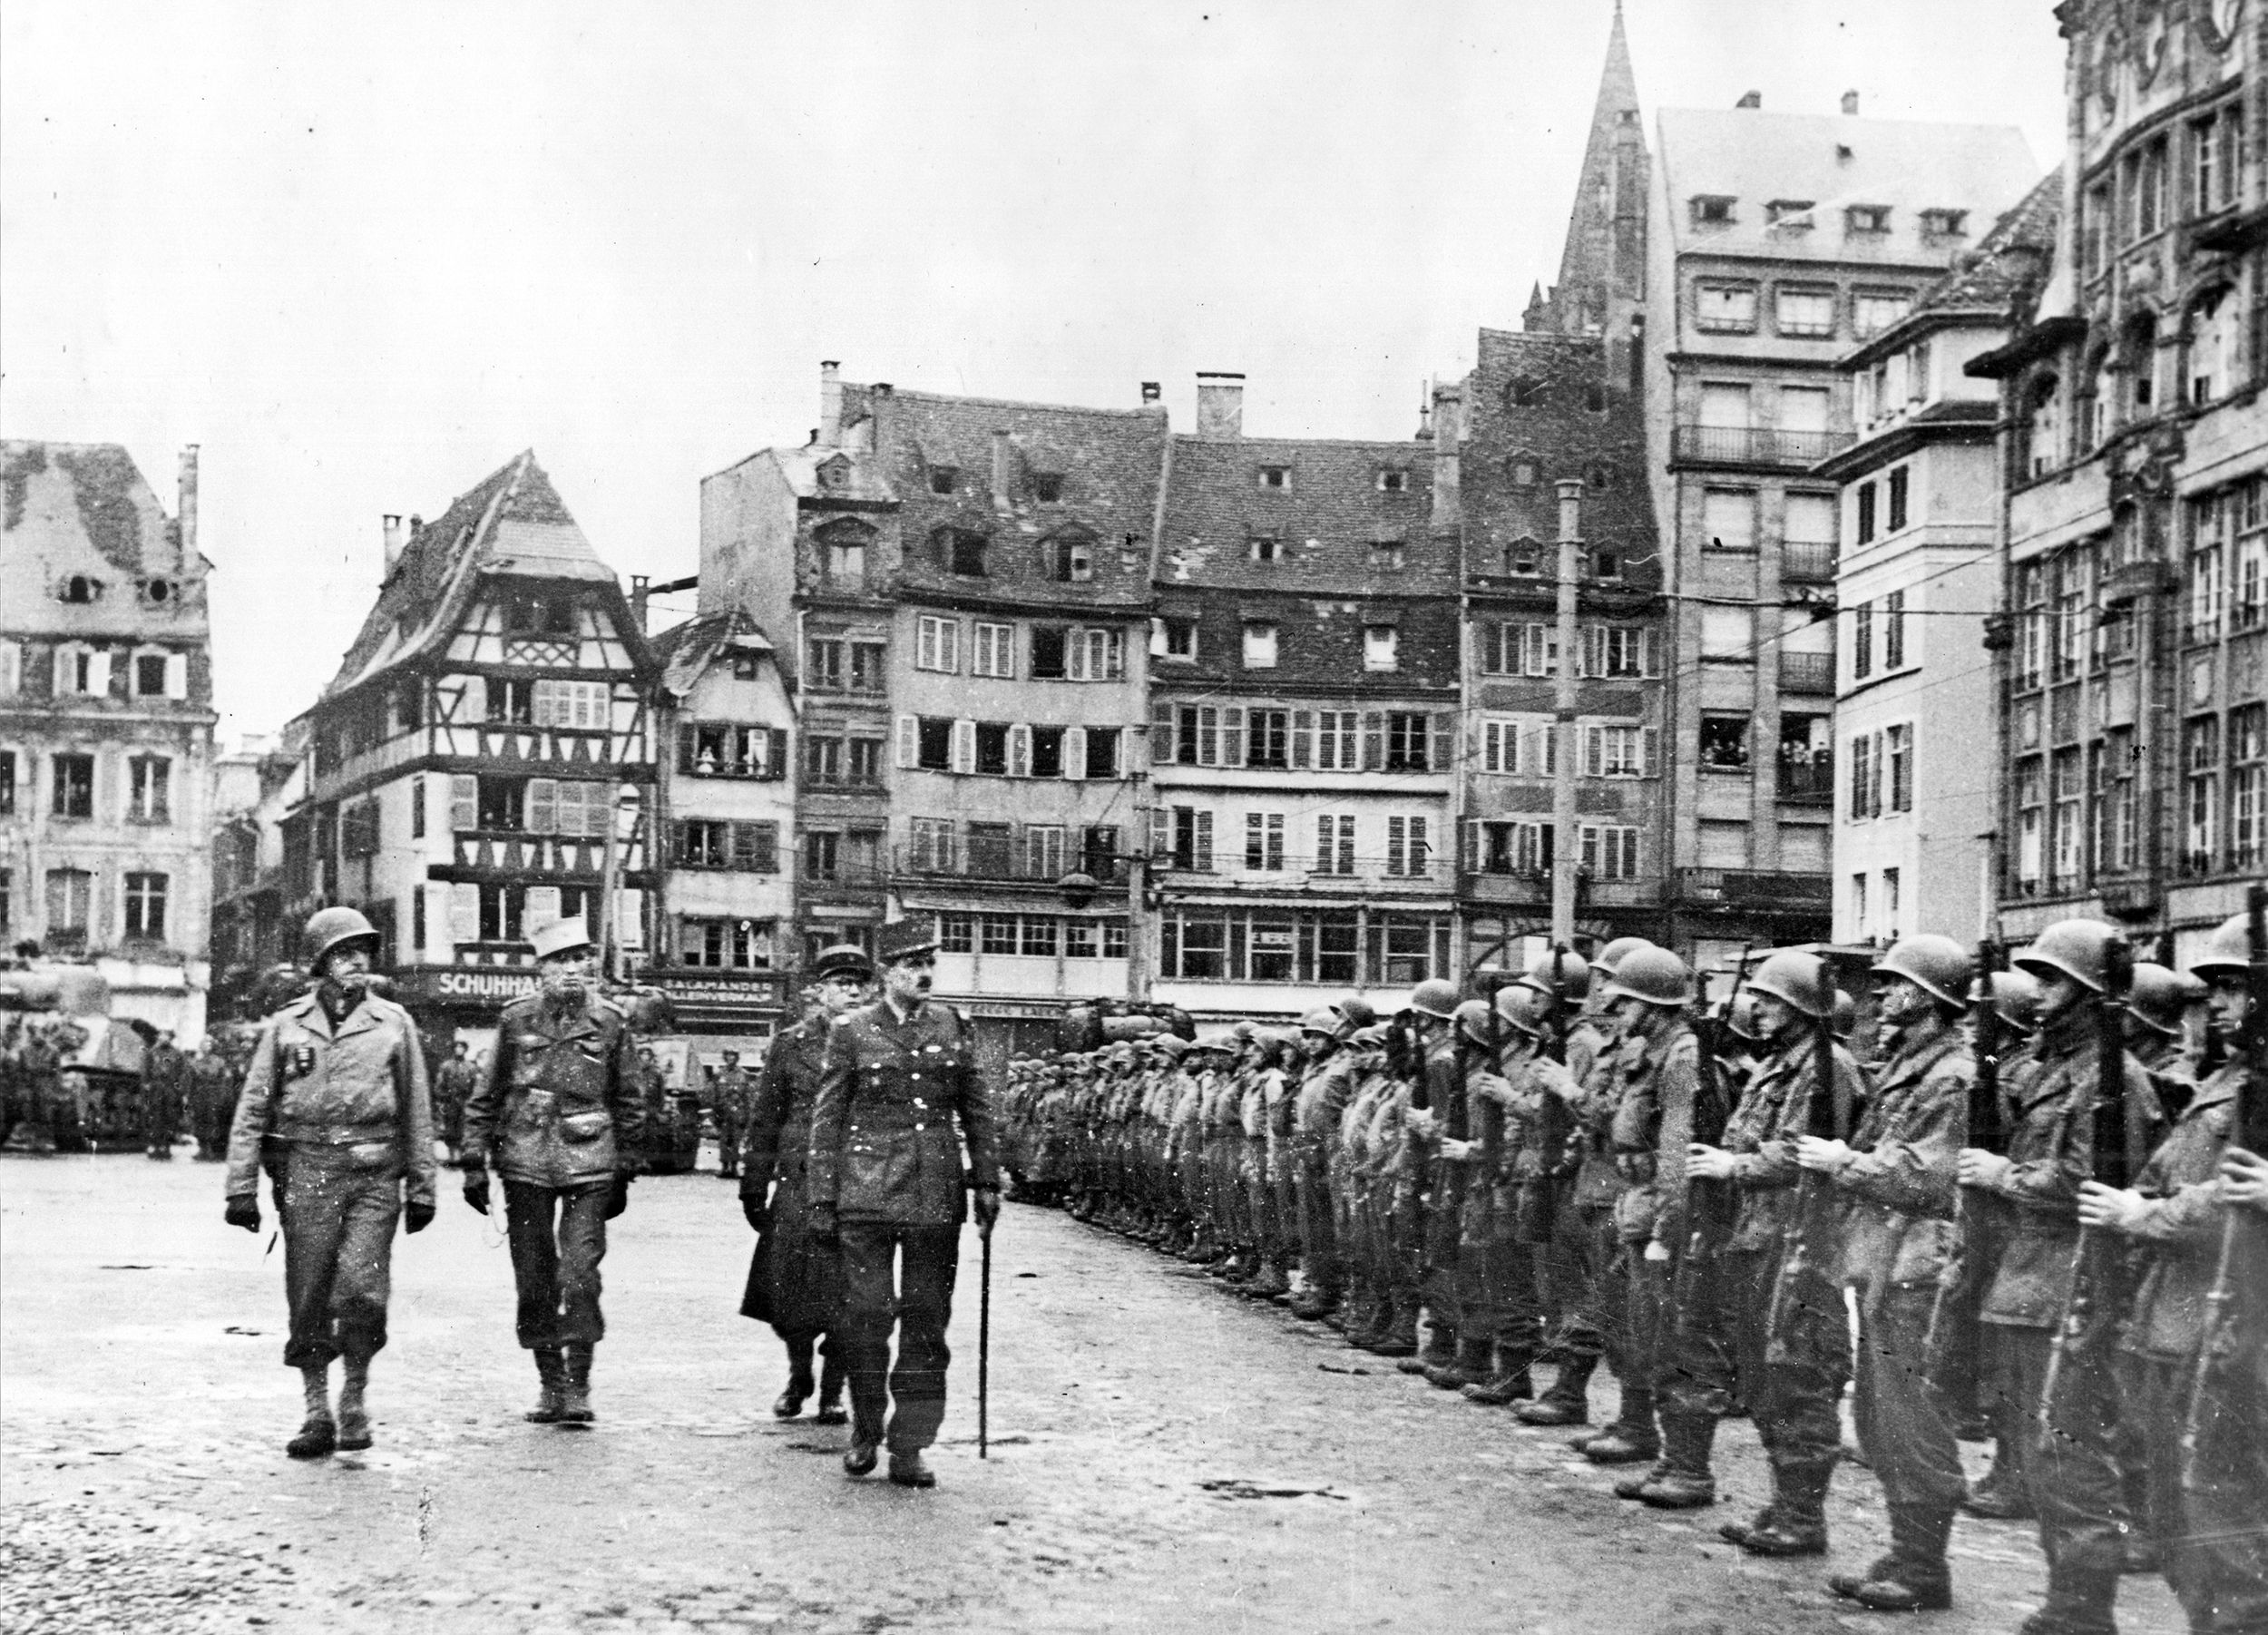 Leclerc, center, reviews his U.S.-uniformed troops in Strasbourg's Place Kléber on November 23, 1944. His armored division had just liberated the Alsatian capital from the Germans.